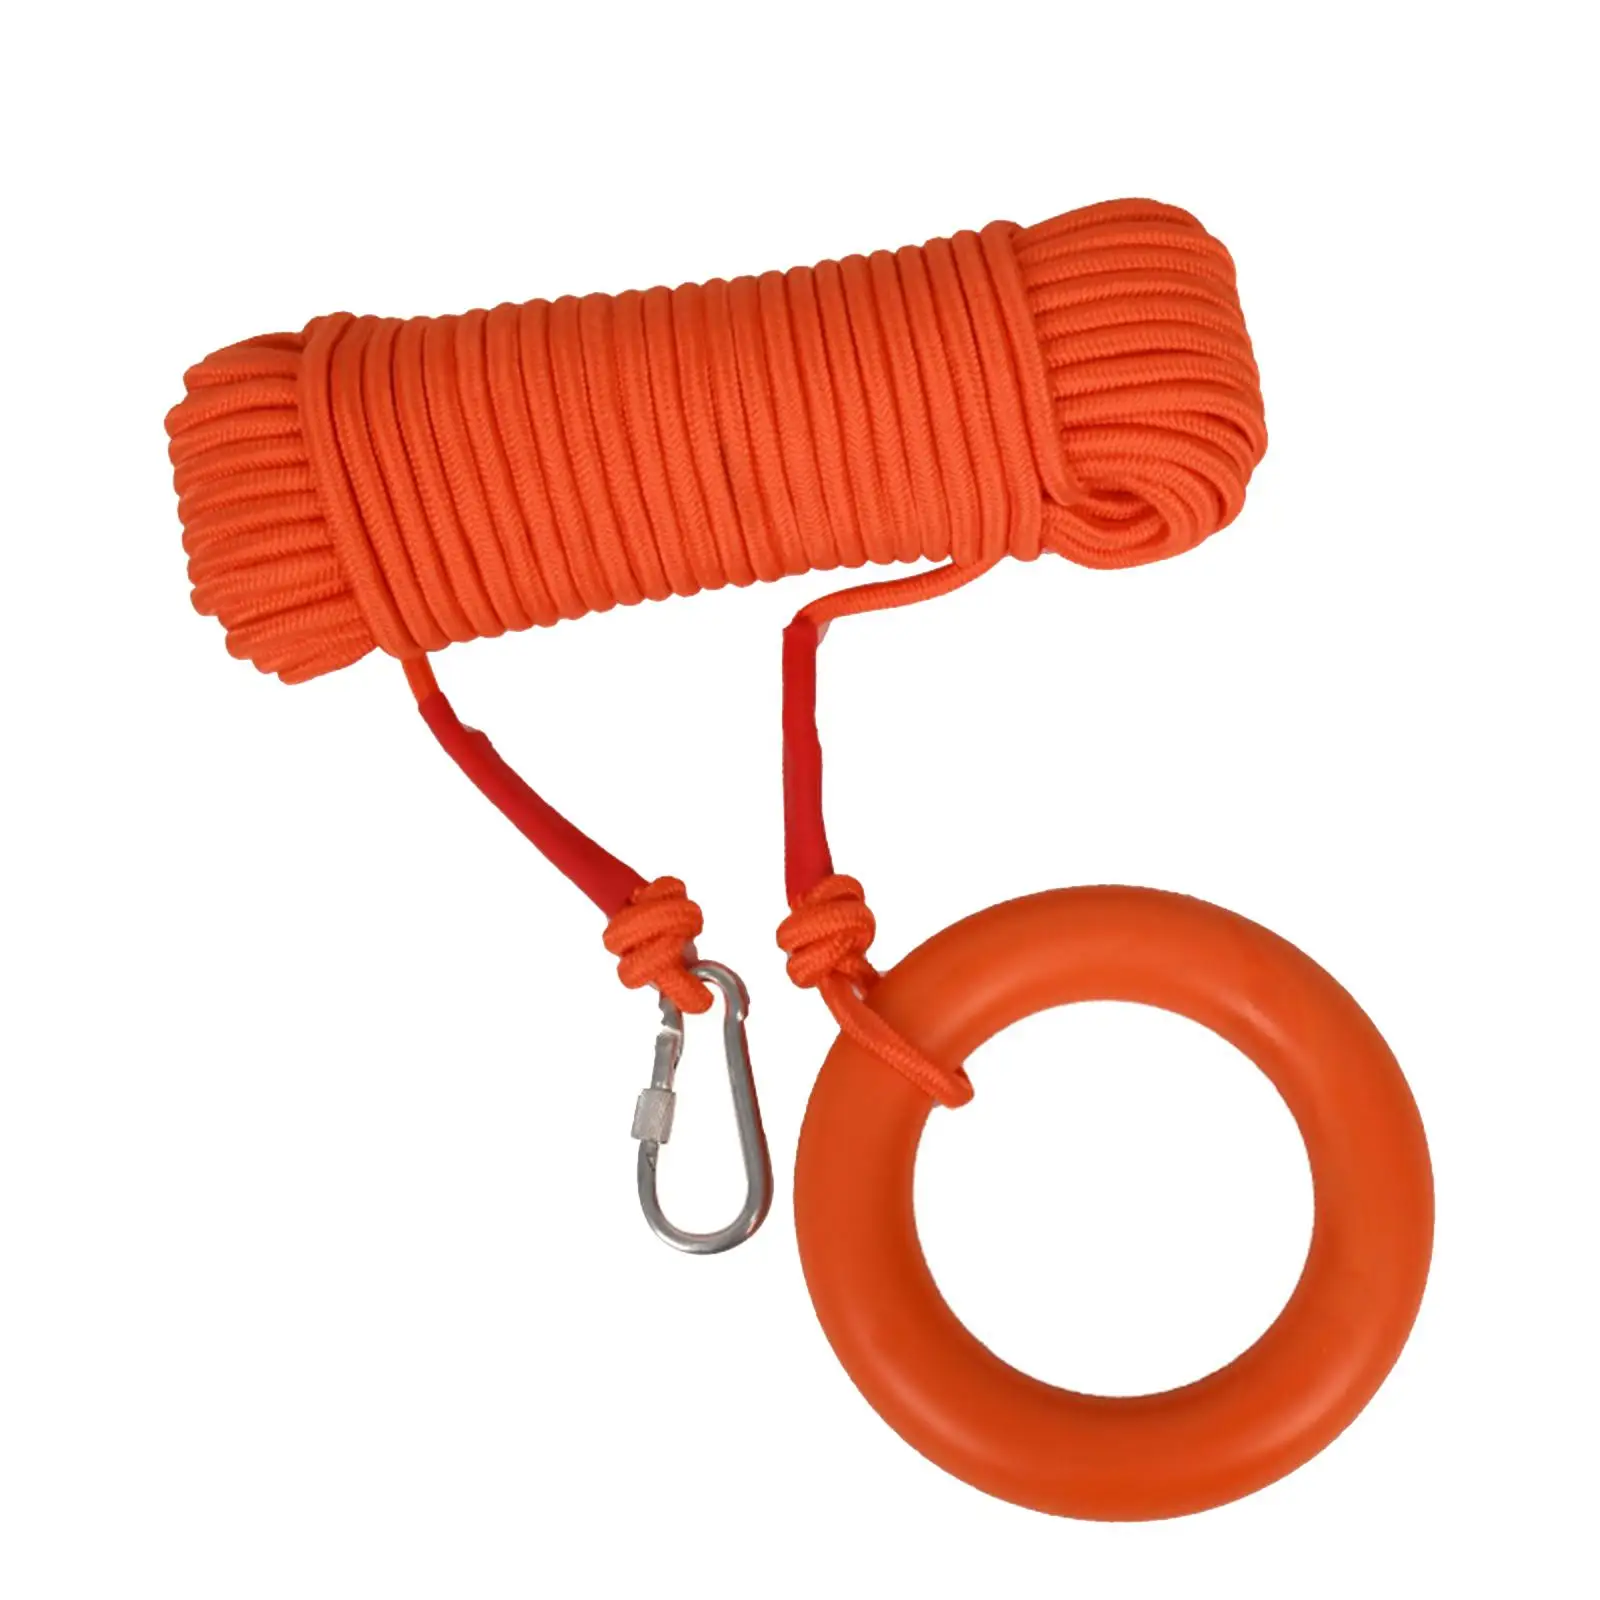 Life Saving Rope Accessory Portable Flotation Device Floating Rope for Boat Swimming Yacht Sailing Canoeing Buoyant Dinghy